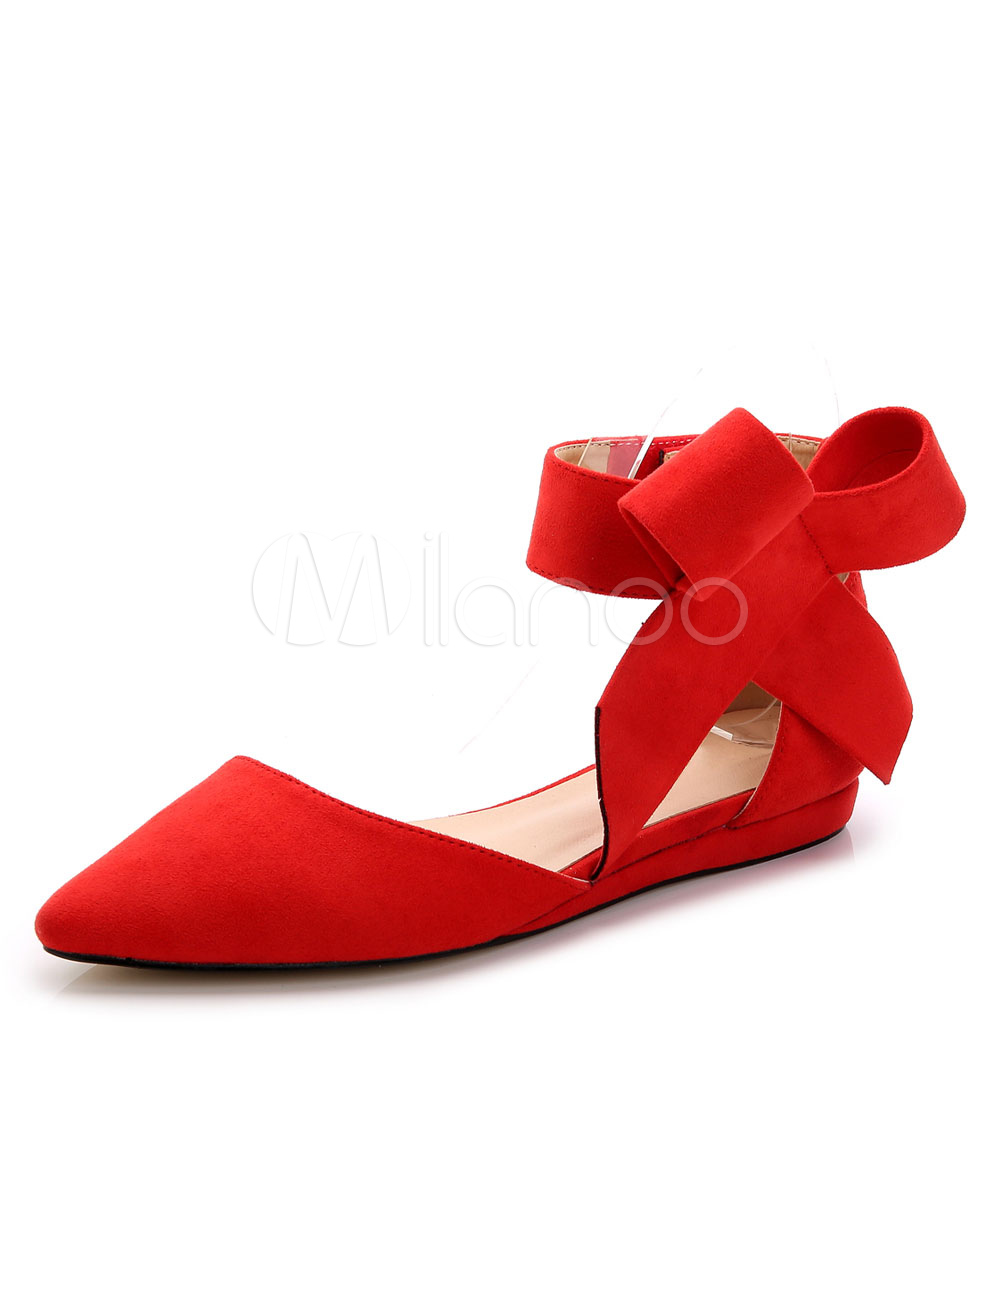 Women Ballet Flats Pointed Toe Bow 